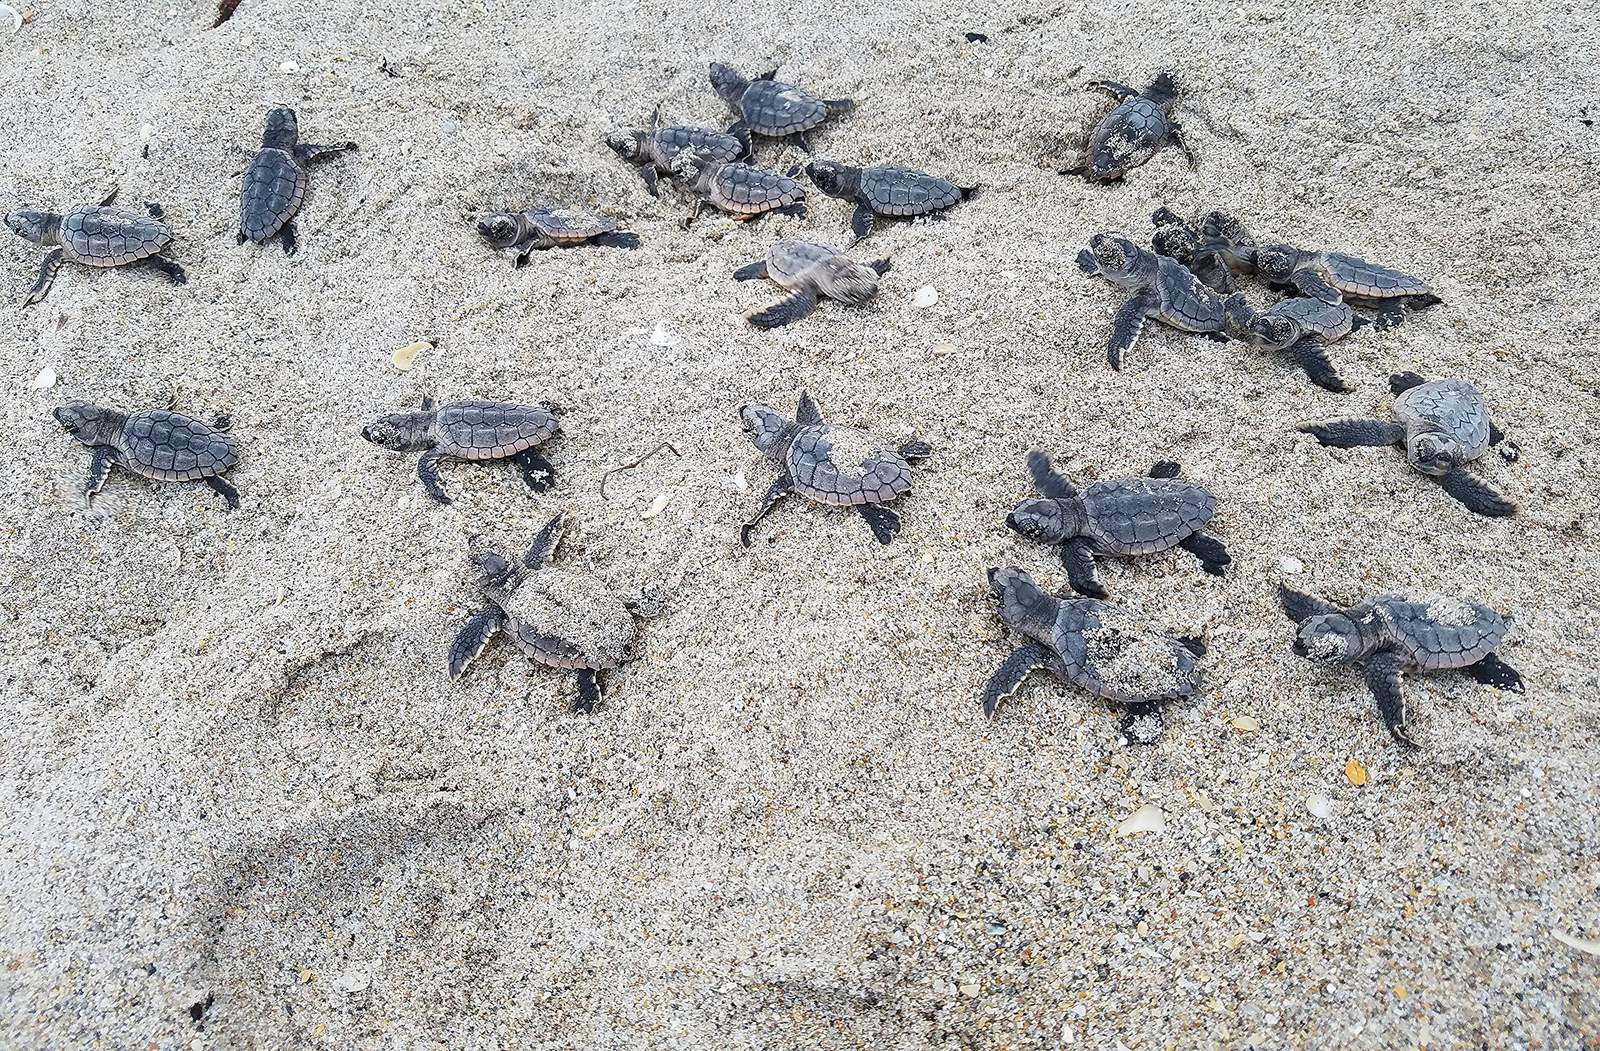 Leave them alone: Dont gather sea turtle eggs exposed by Tropical Storm Isaias